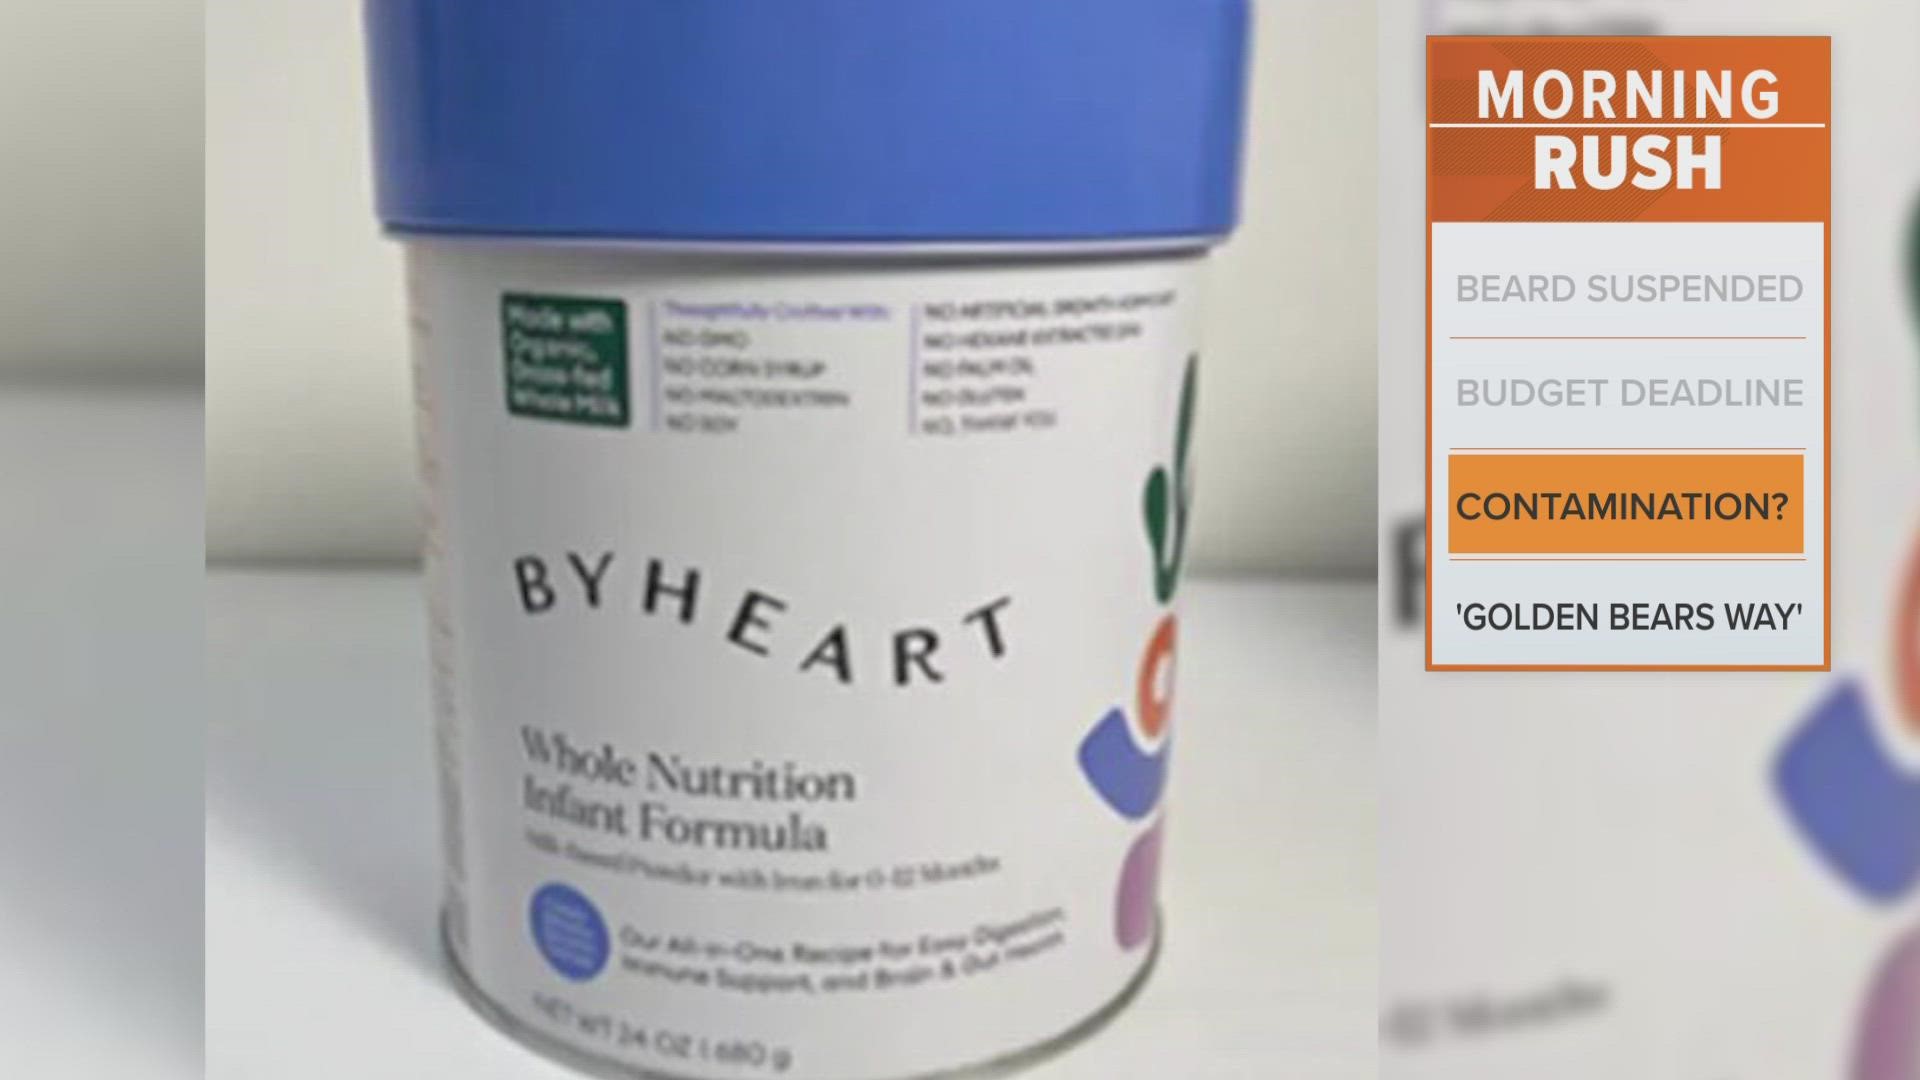 The brand said it's pulling five batches of the formula "out of an abundance of caution" after testing at a third-party facility found bacteria.